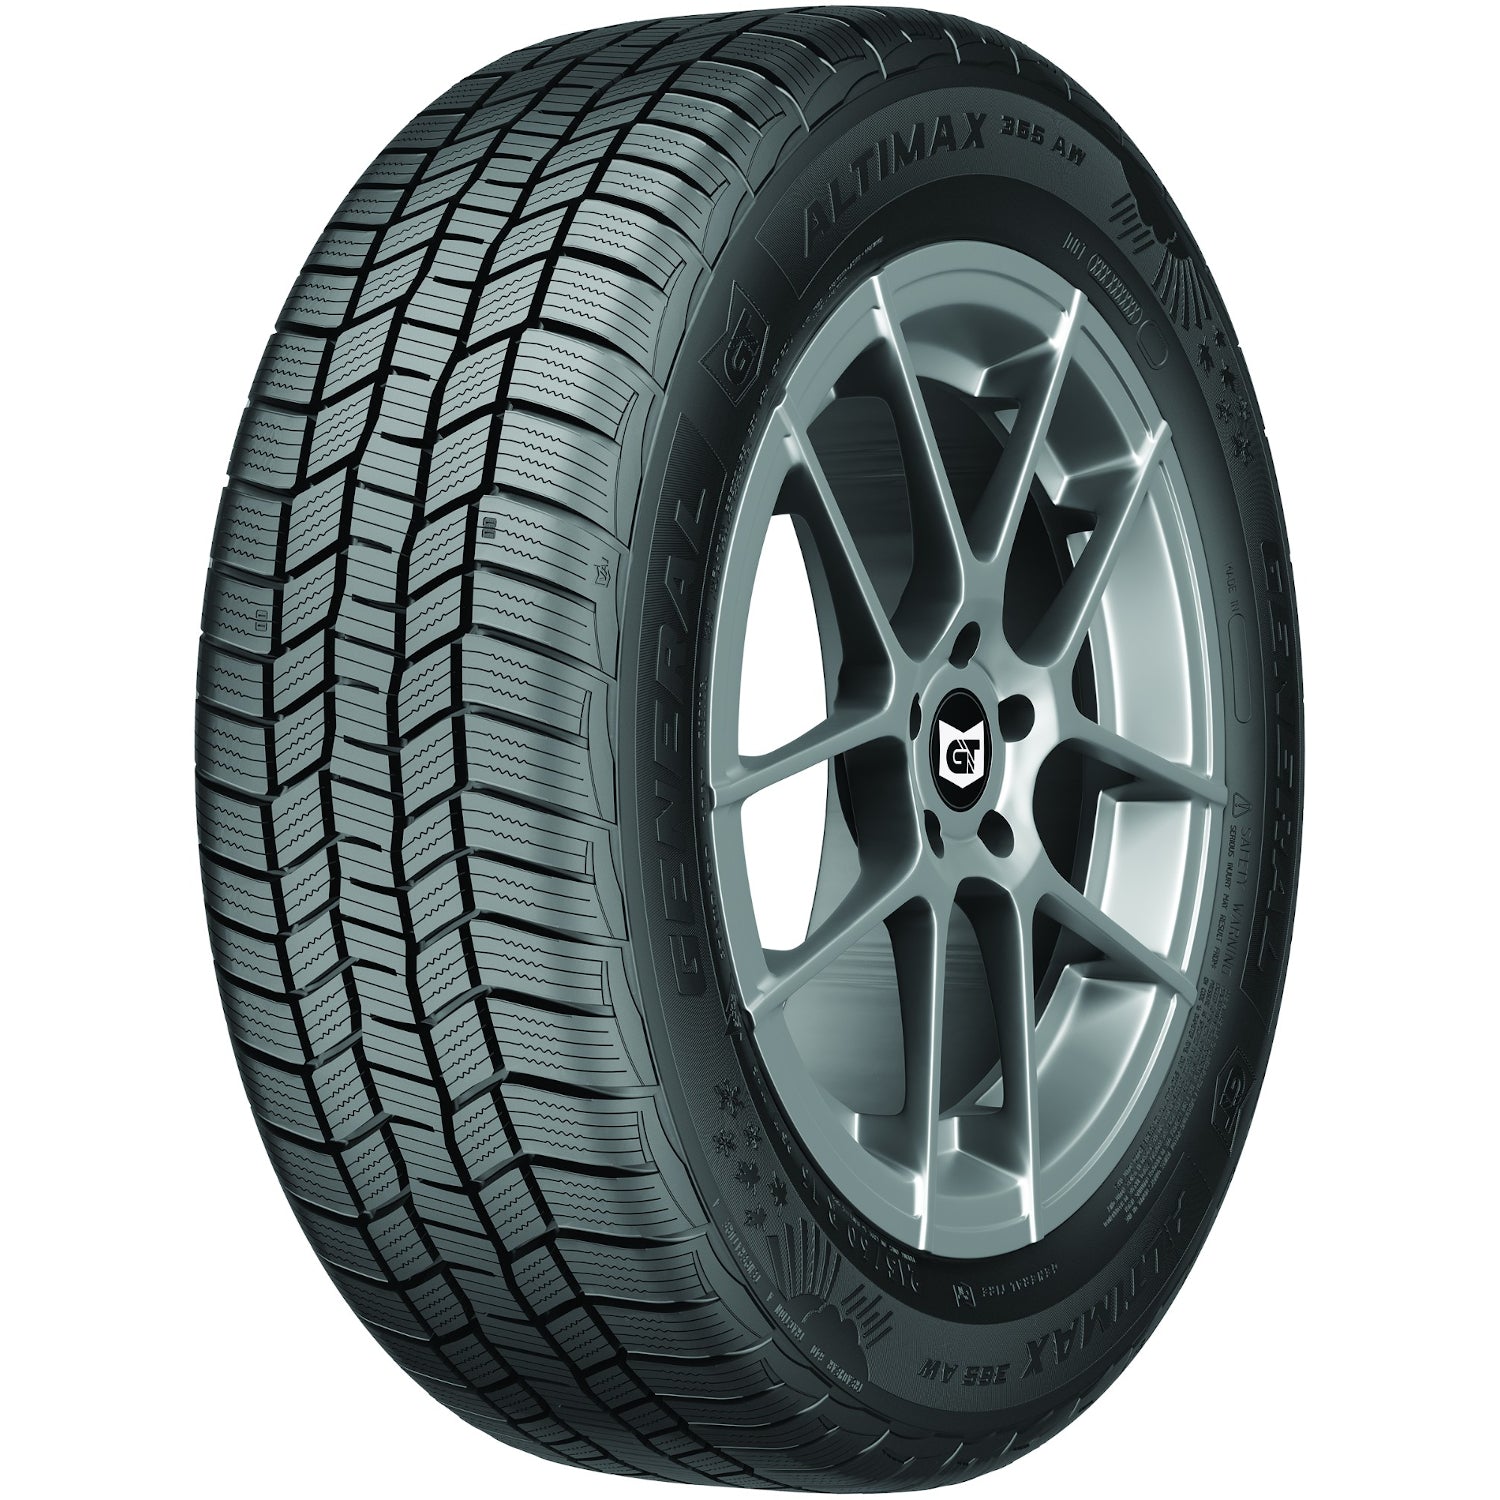 GENERAL ALTIMAX 365AW 235/45R17 (25.3X9.3R 17) Tires